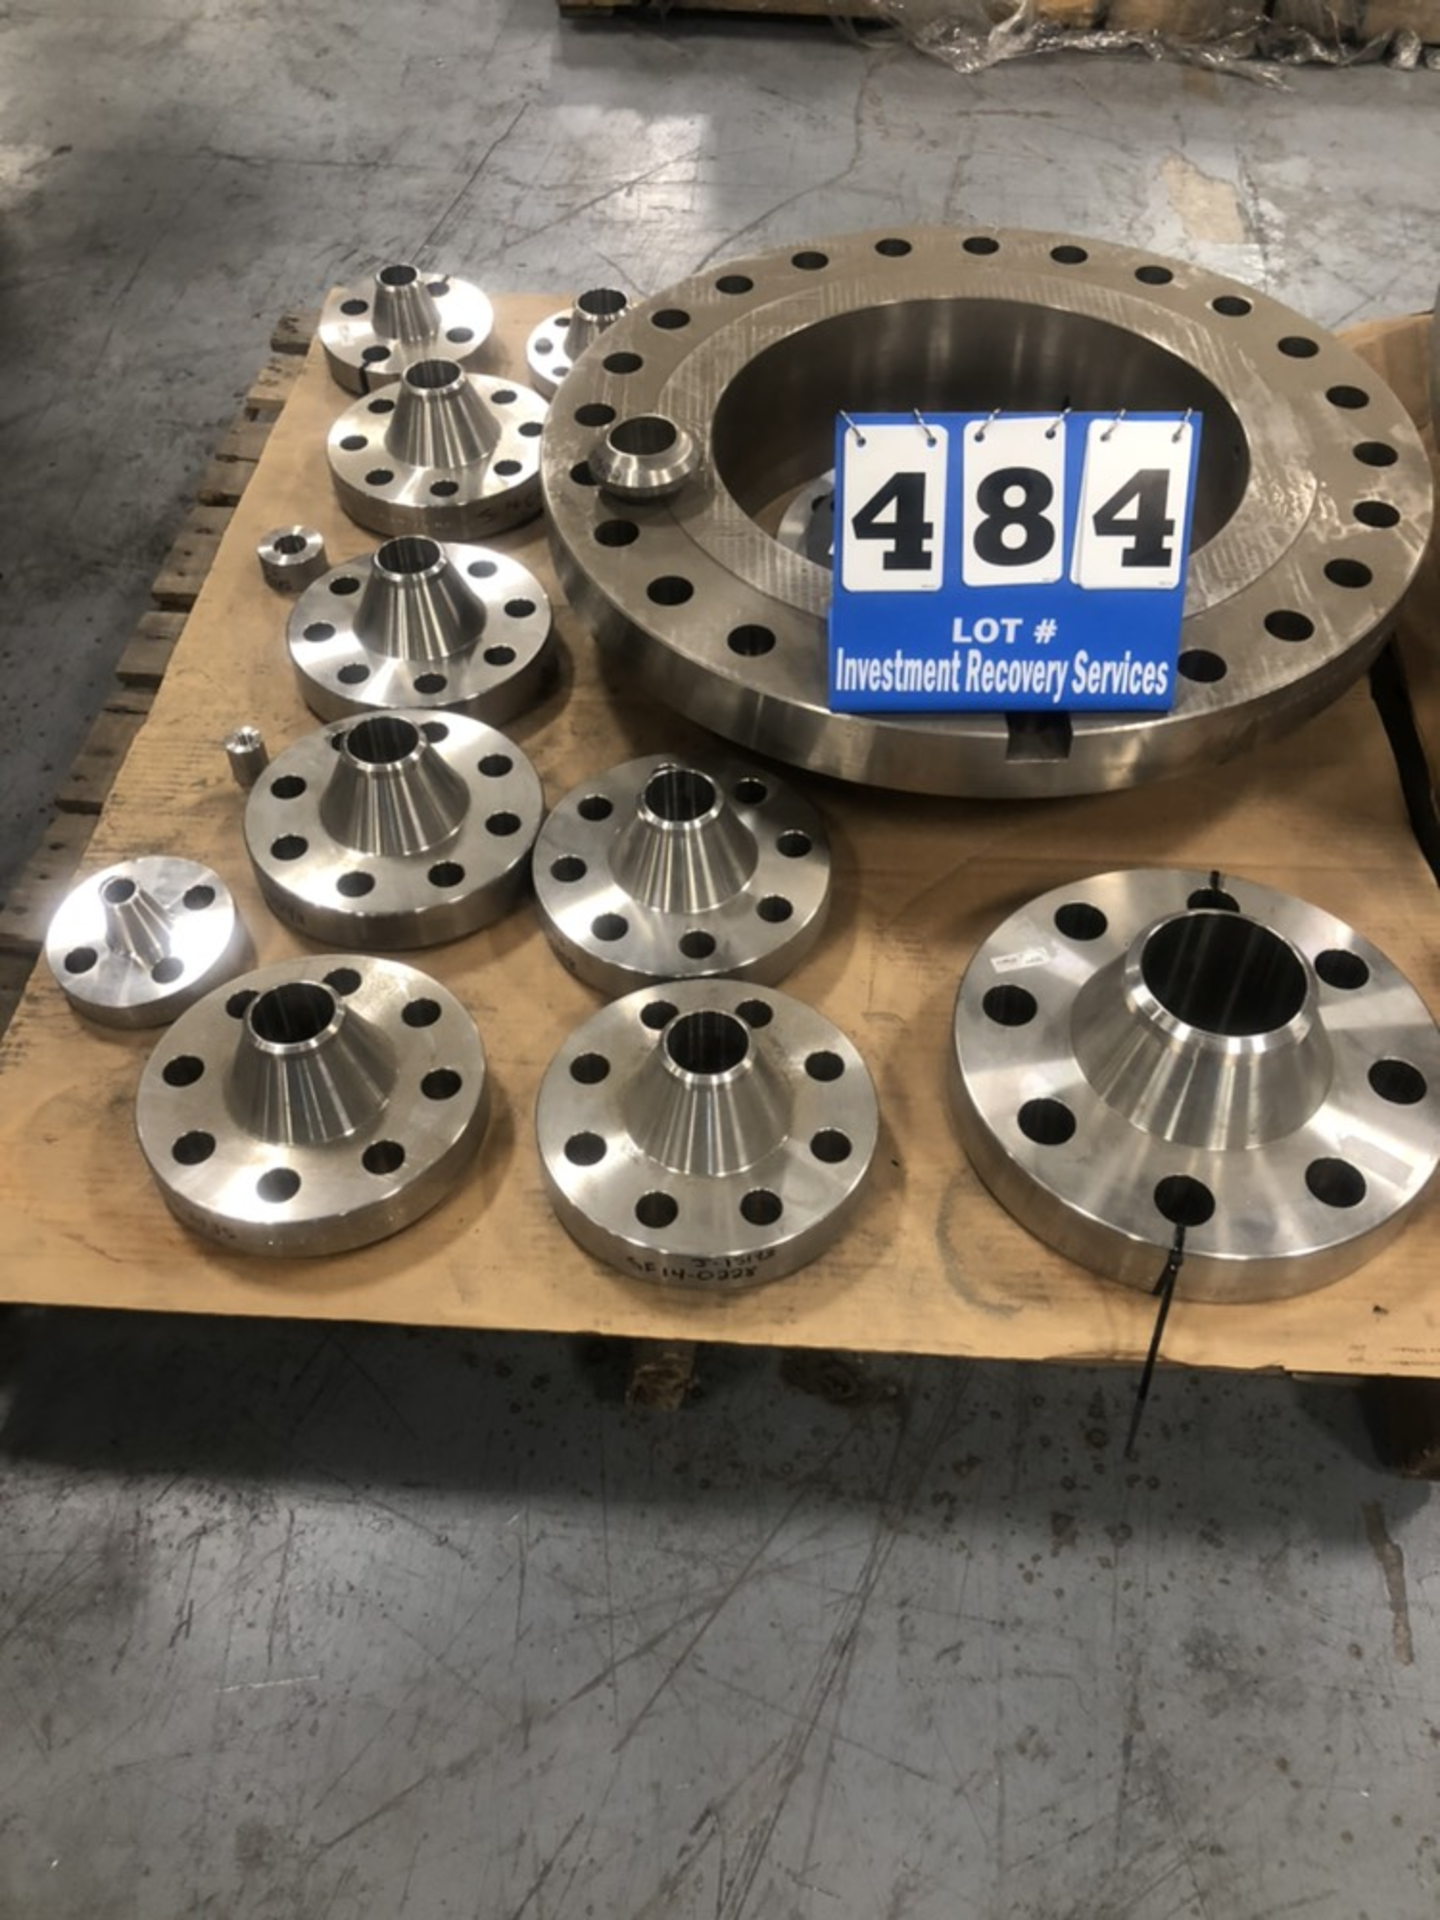 Stainless Steel Flanges ( LOCATION 4: 850 AEROPLAZA DR, COLORADO SPRINGS, CO 80916 ) - Image 2 of 2